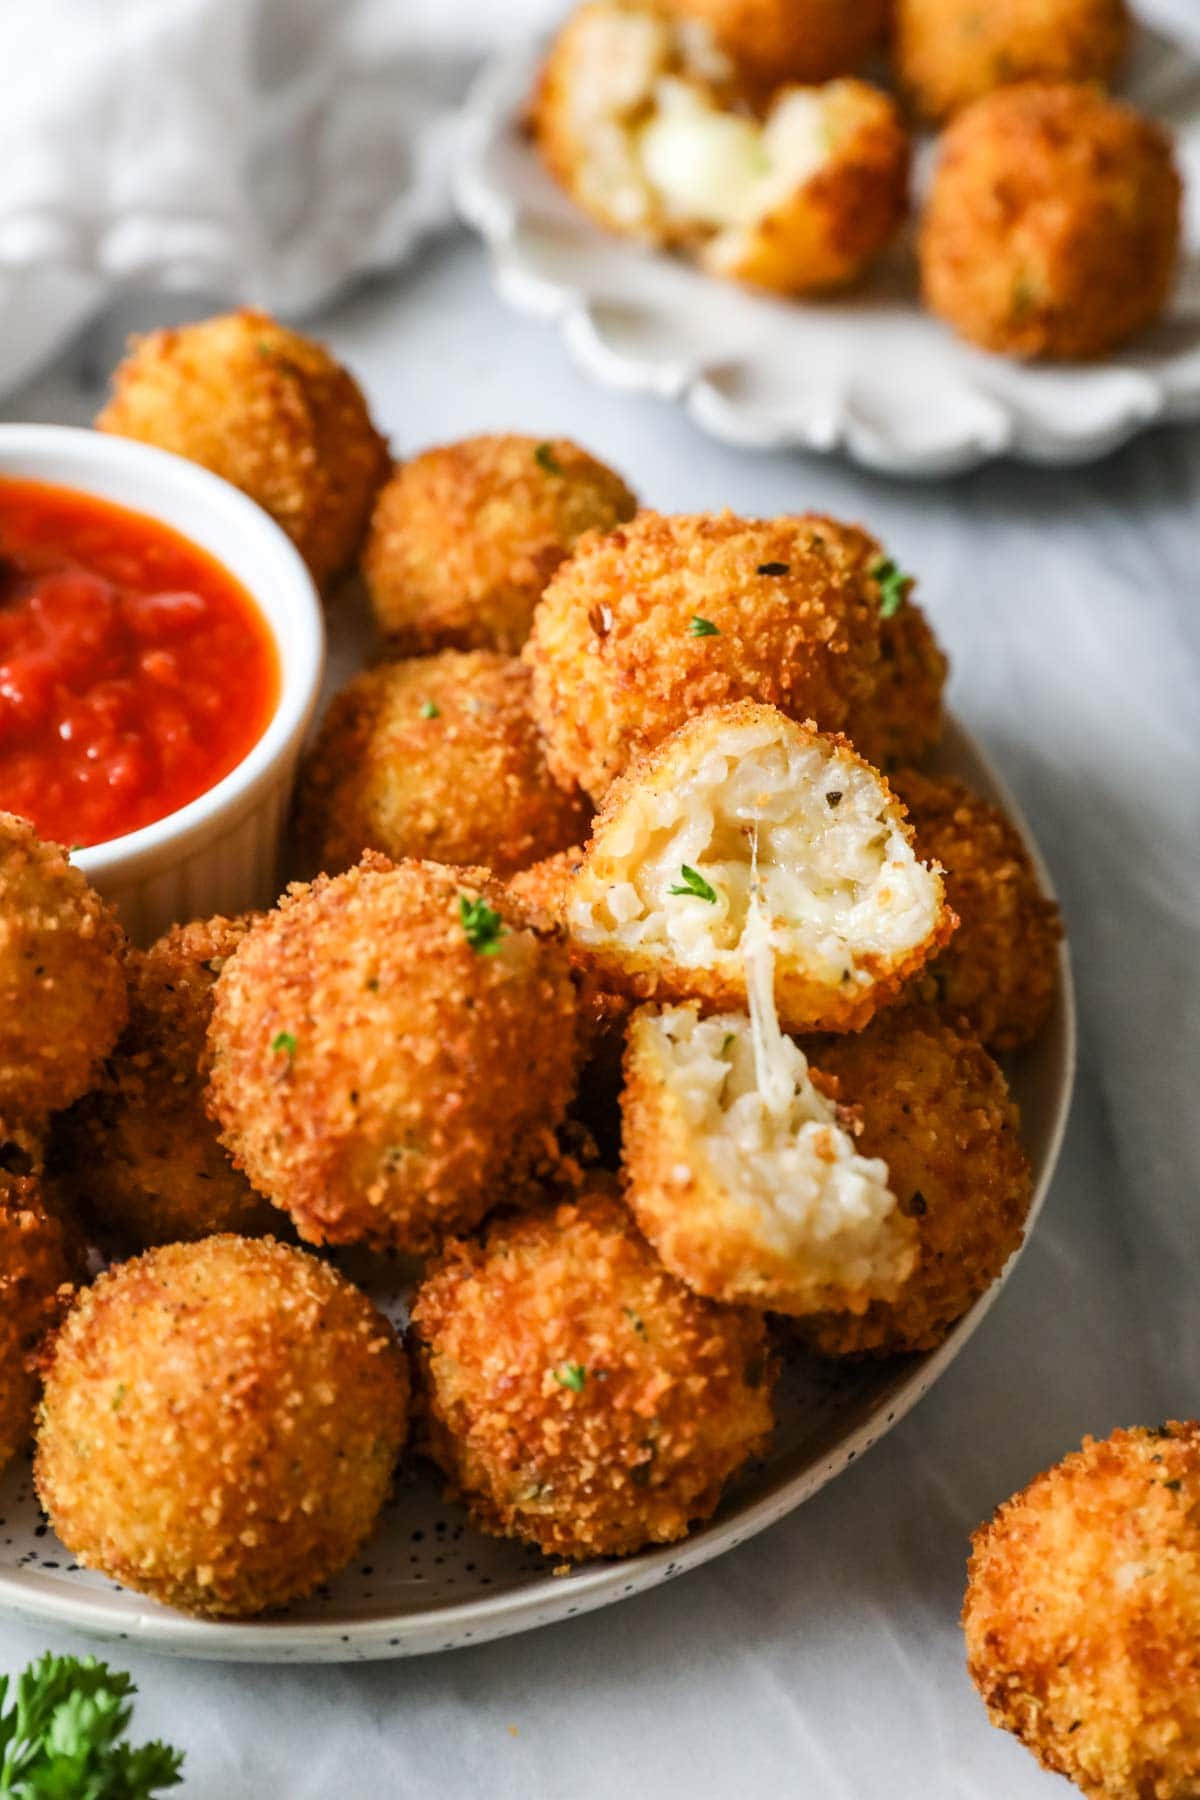 Plate of arancini with one cut in half to show a cheesy filling.